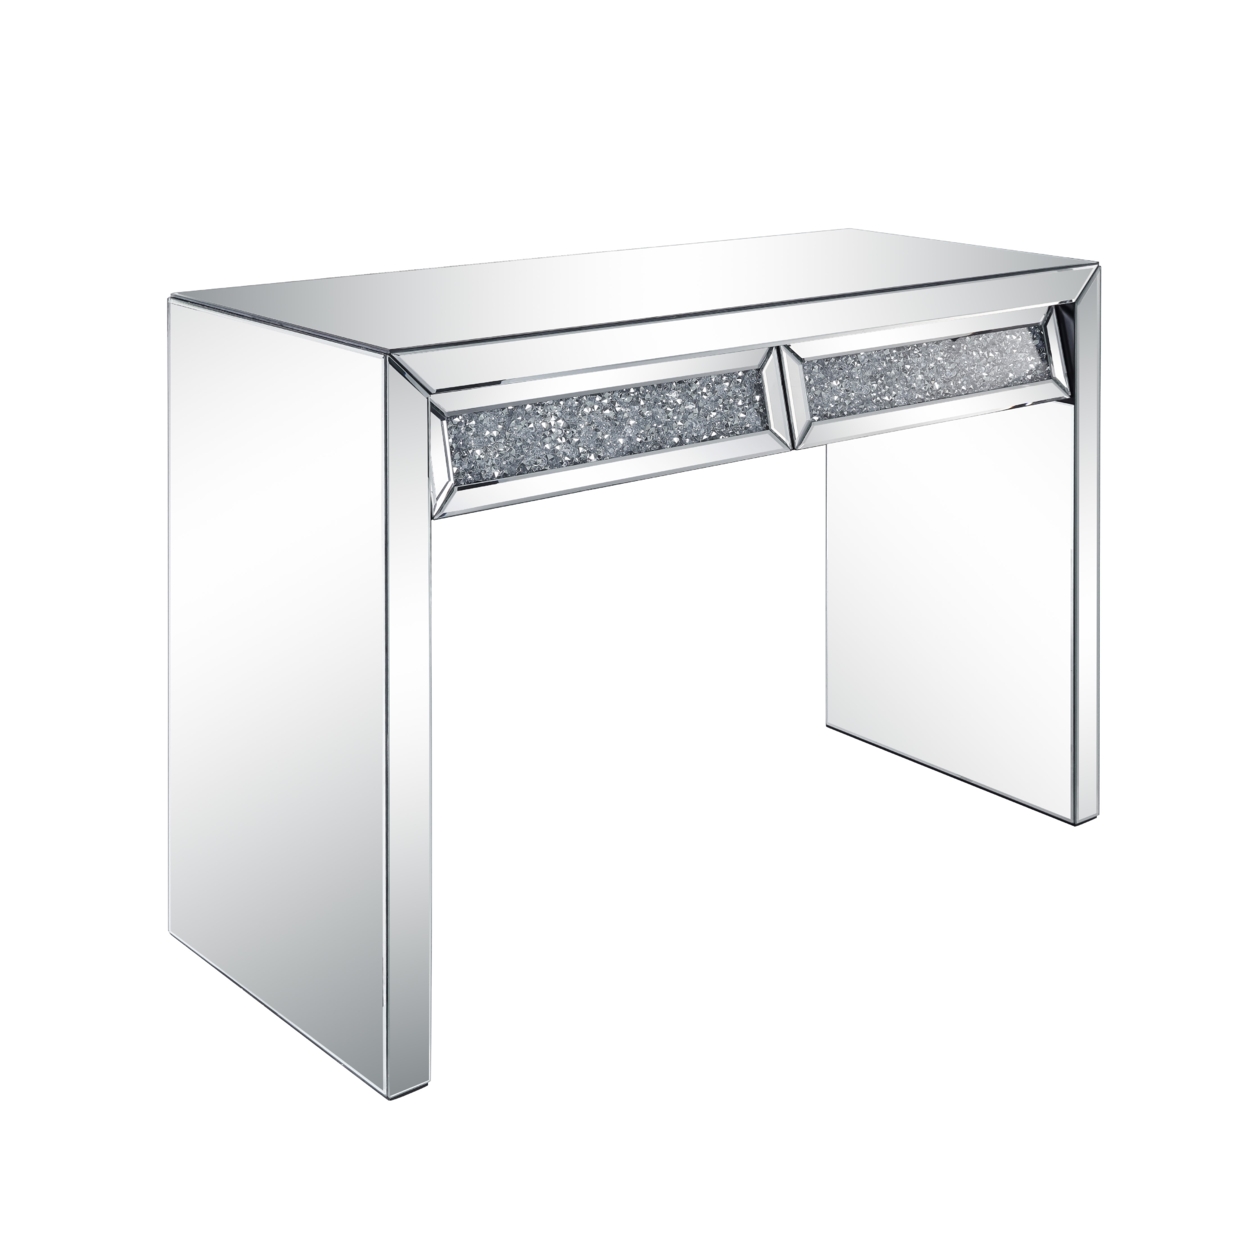 Console Table With Two Storage Drawers And Faux Diamond Inlay, Silver- Saltoro Sherpi